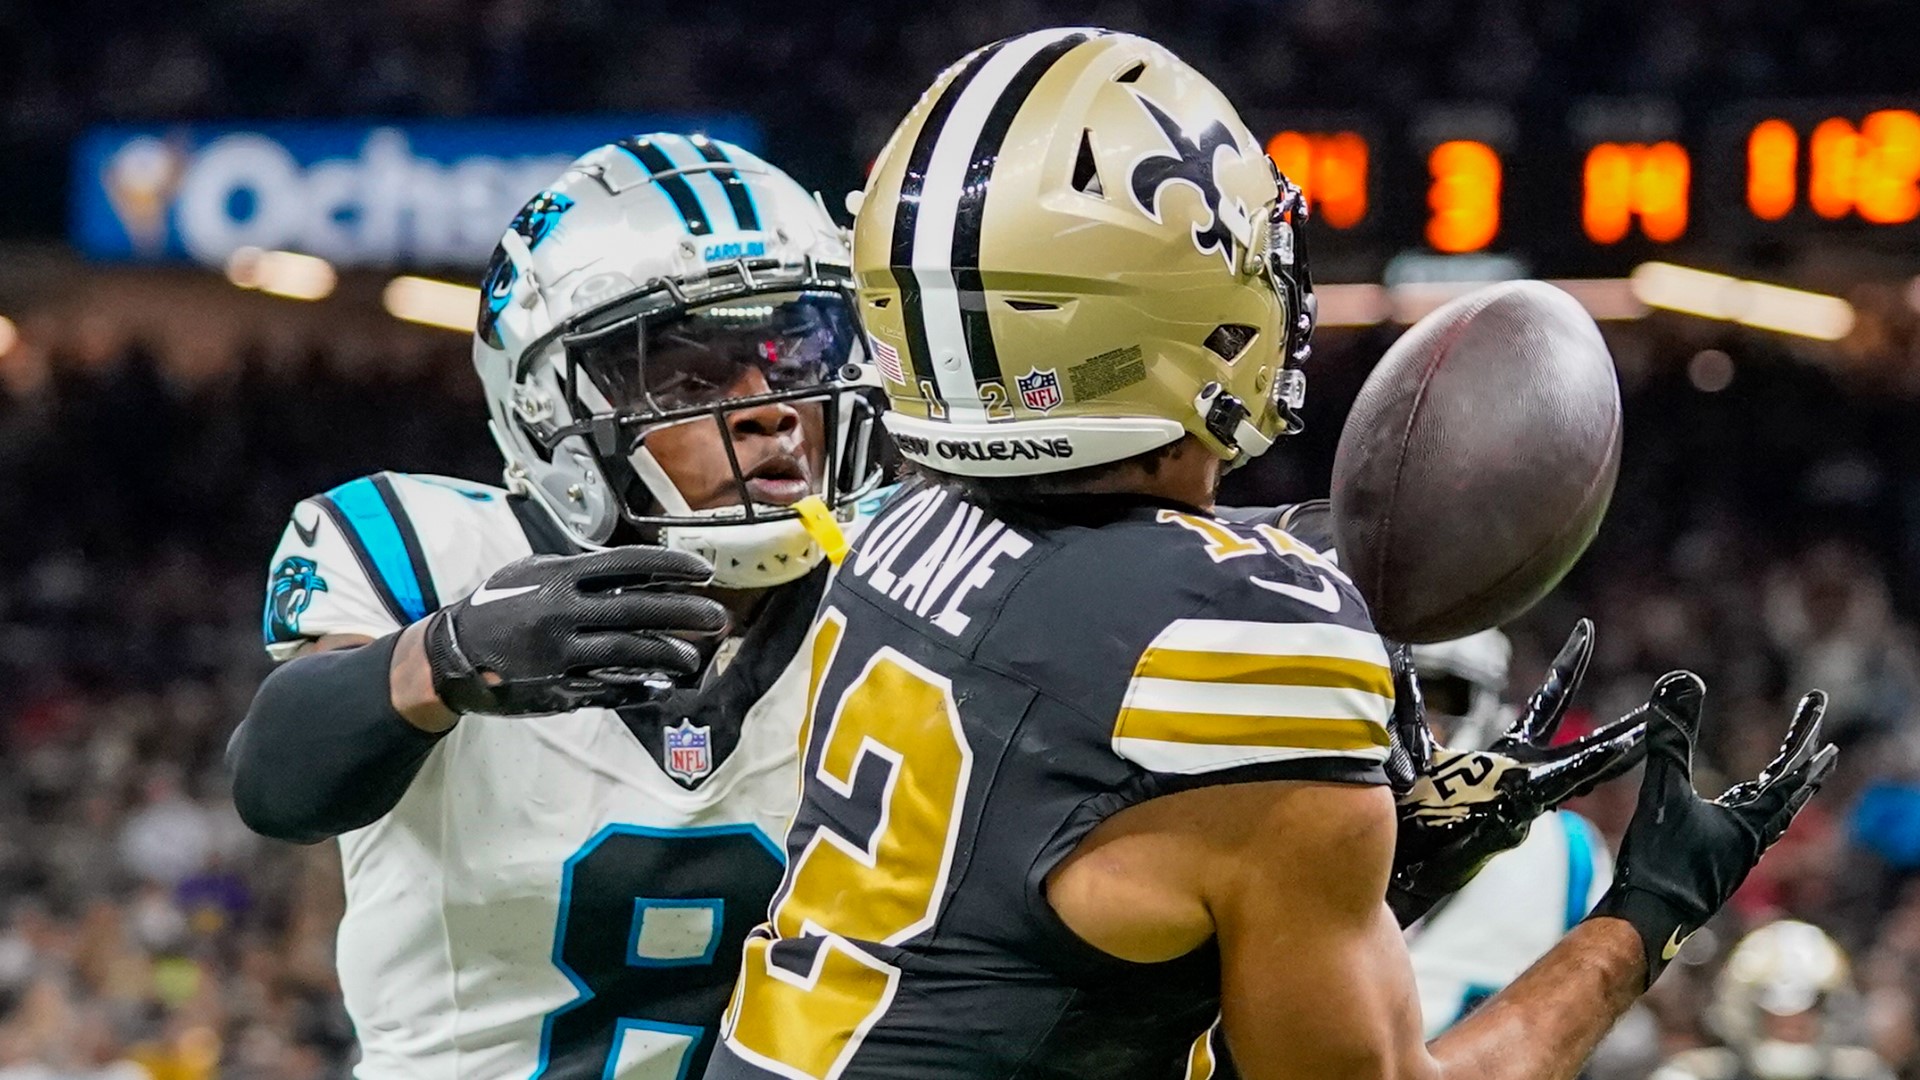 WWL-TV Sports Director Doug Mouton shares his four takeaways from the Saints' 28-6 win over the Panthers